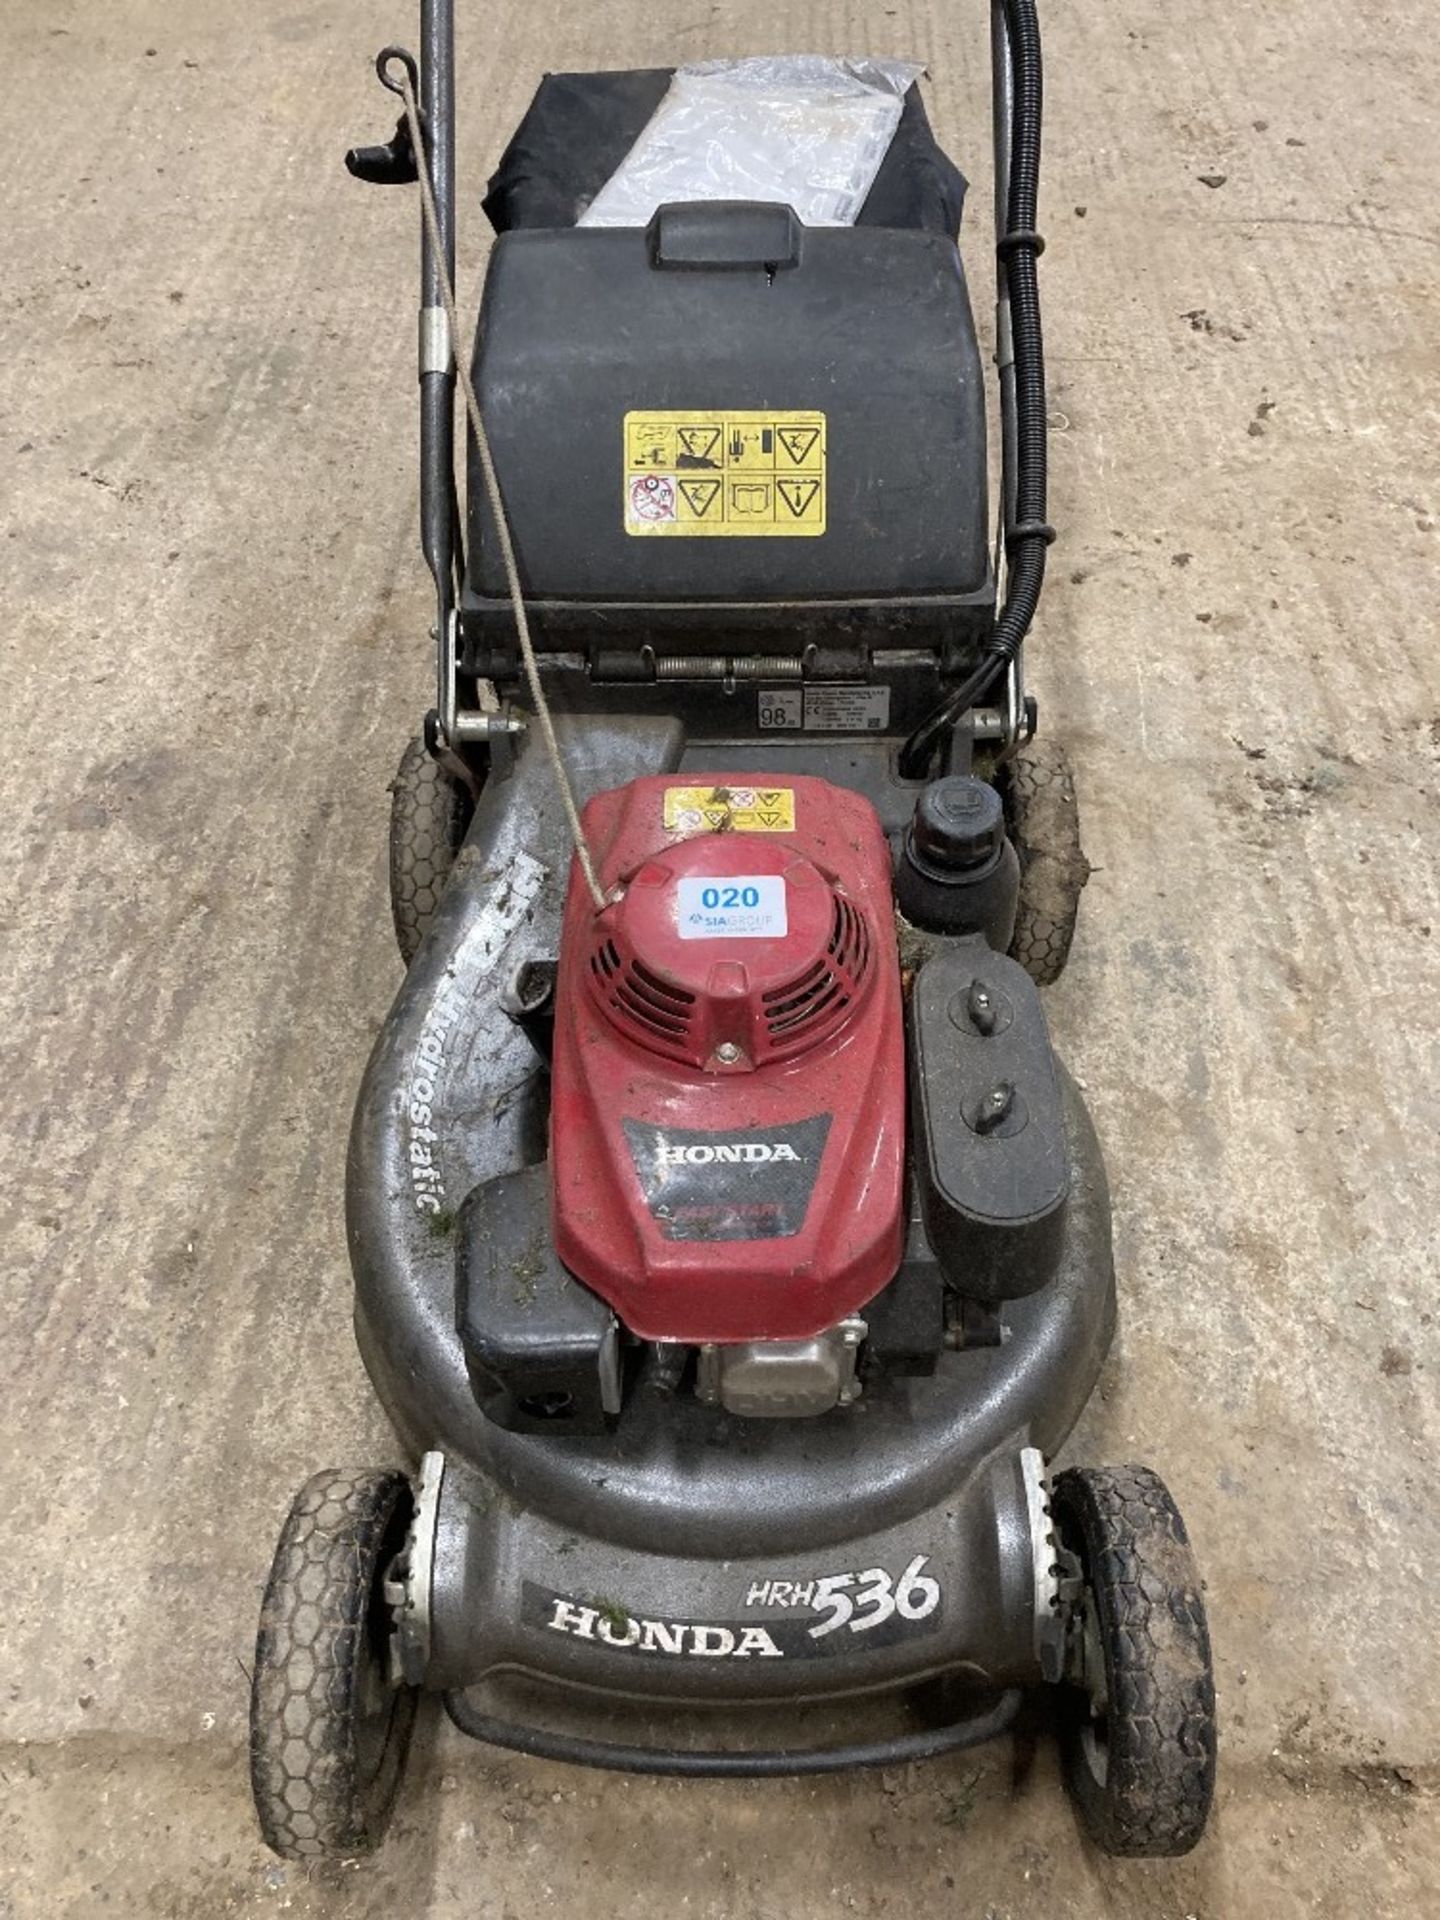 Honda HRH536 K4 Rotary Lawn Mower with Roller - Image 2 of 4